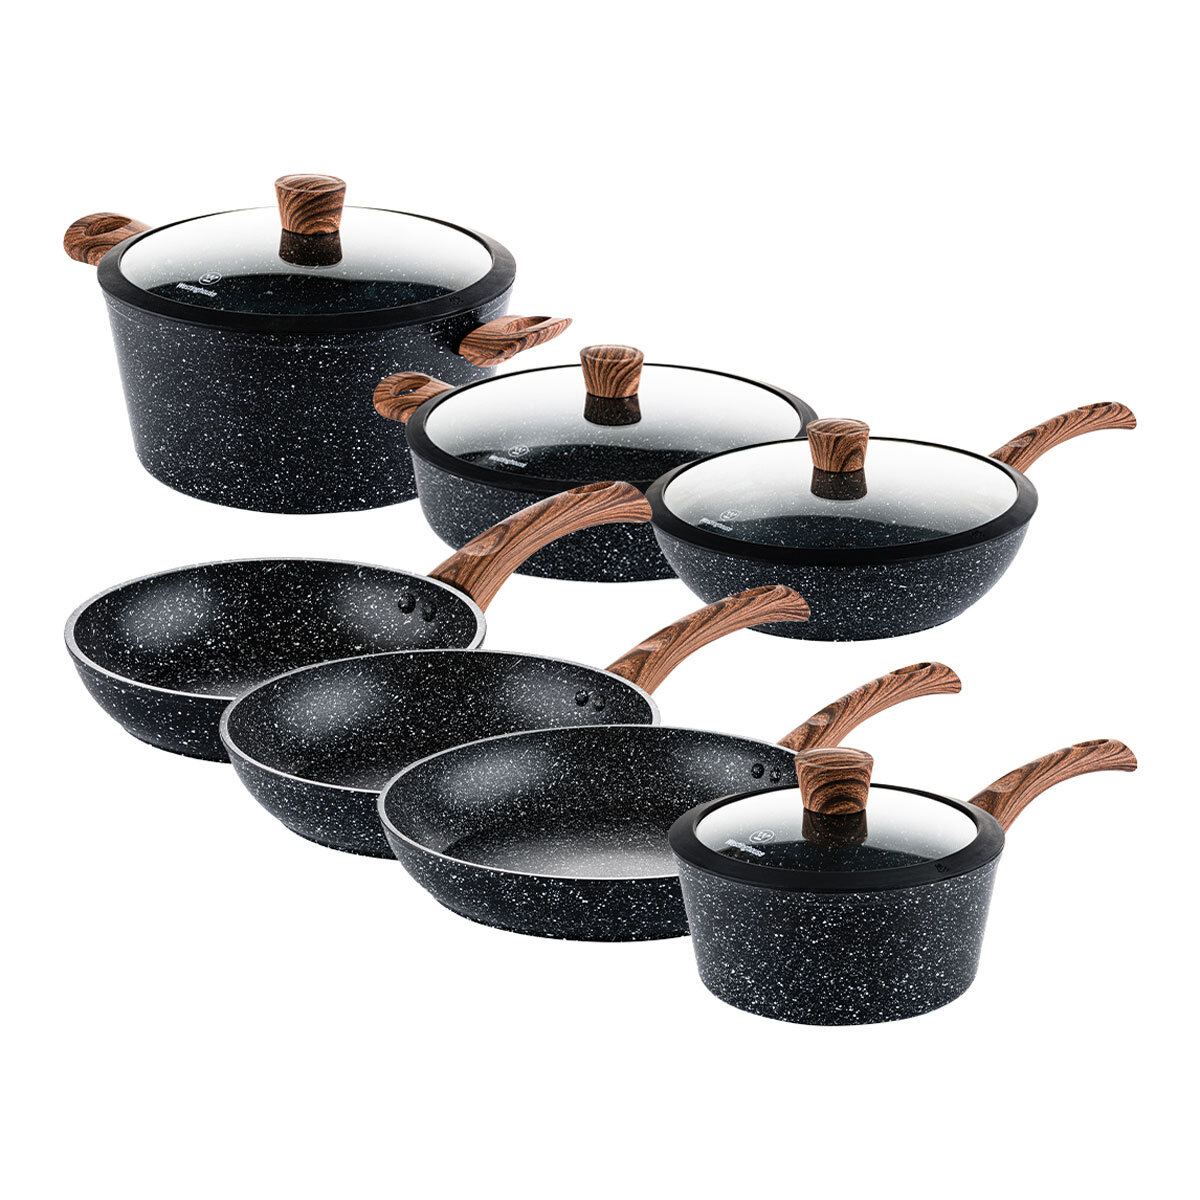 Westinghouse Cookware Essentials Cookware Set with Wooden Handles, 11 Piece